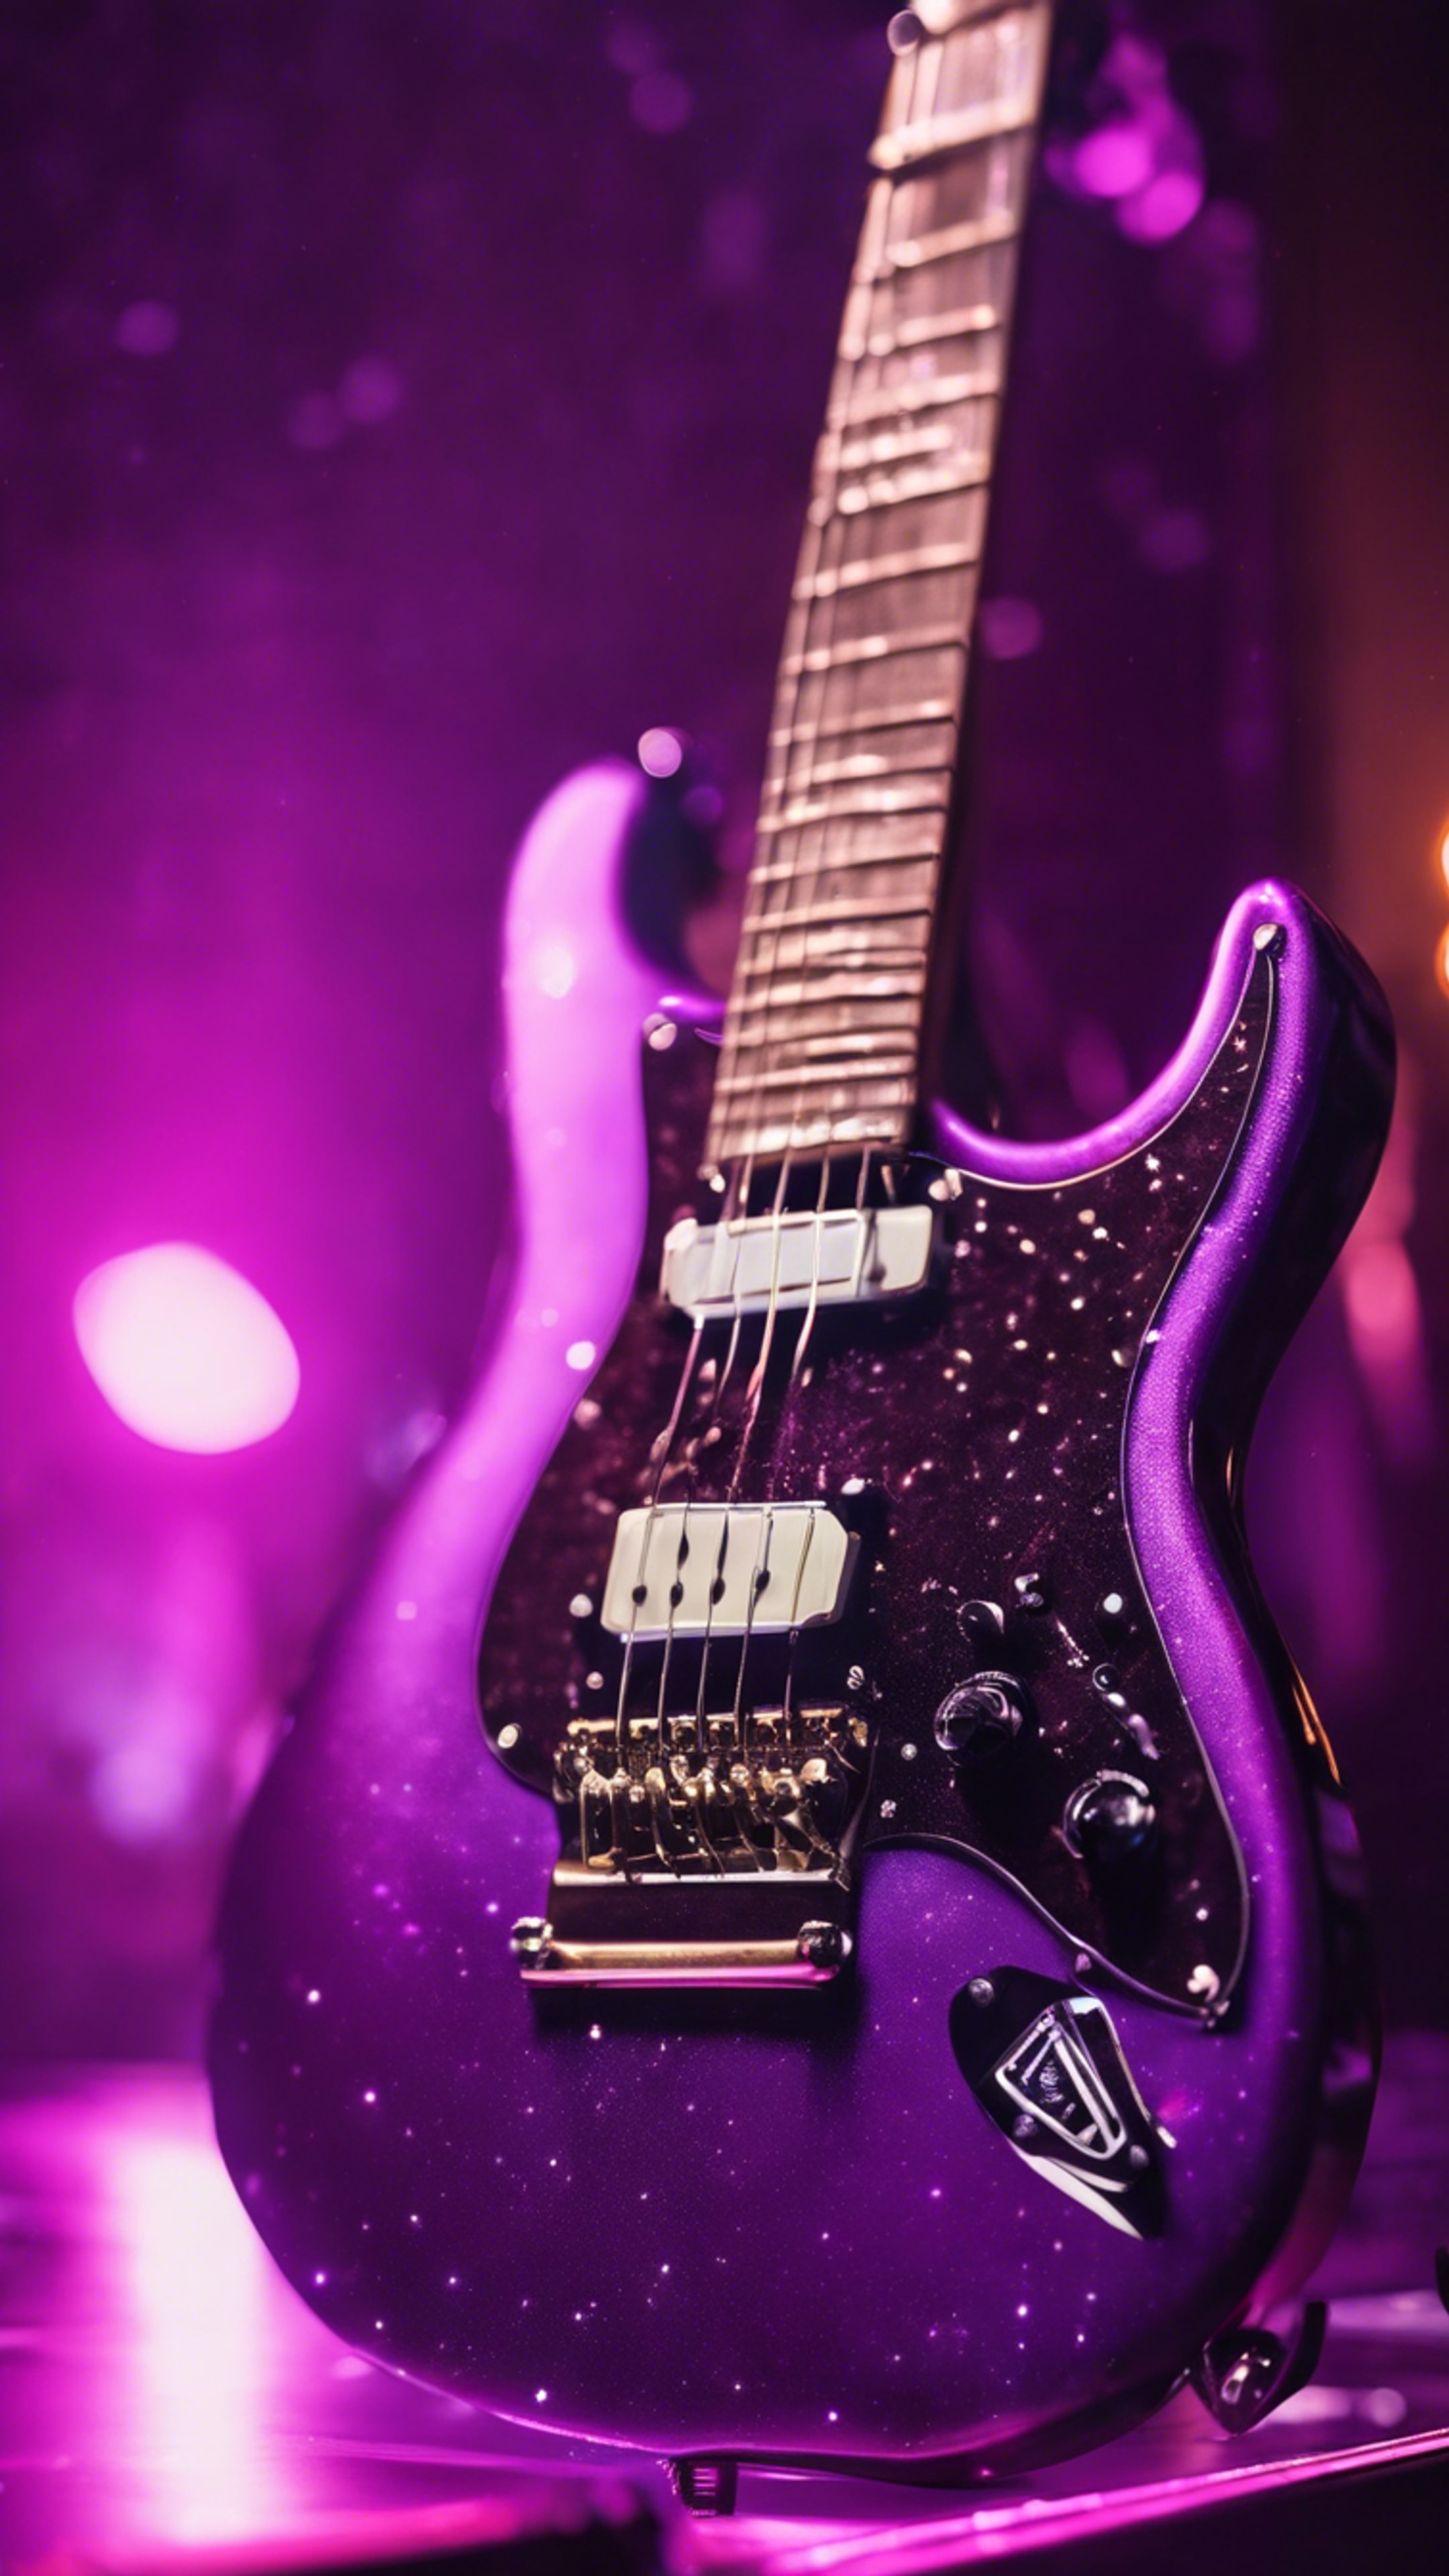 An electric guitar, finished in a glossy neon purple, under the cool stage lights of a concert. Wallpaper[e32ffa723fc740a5910d]